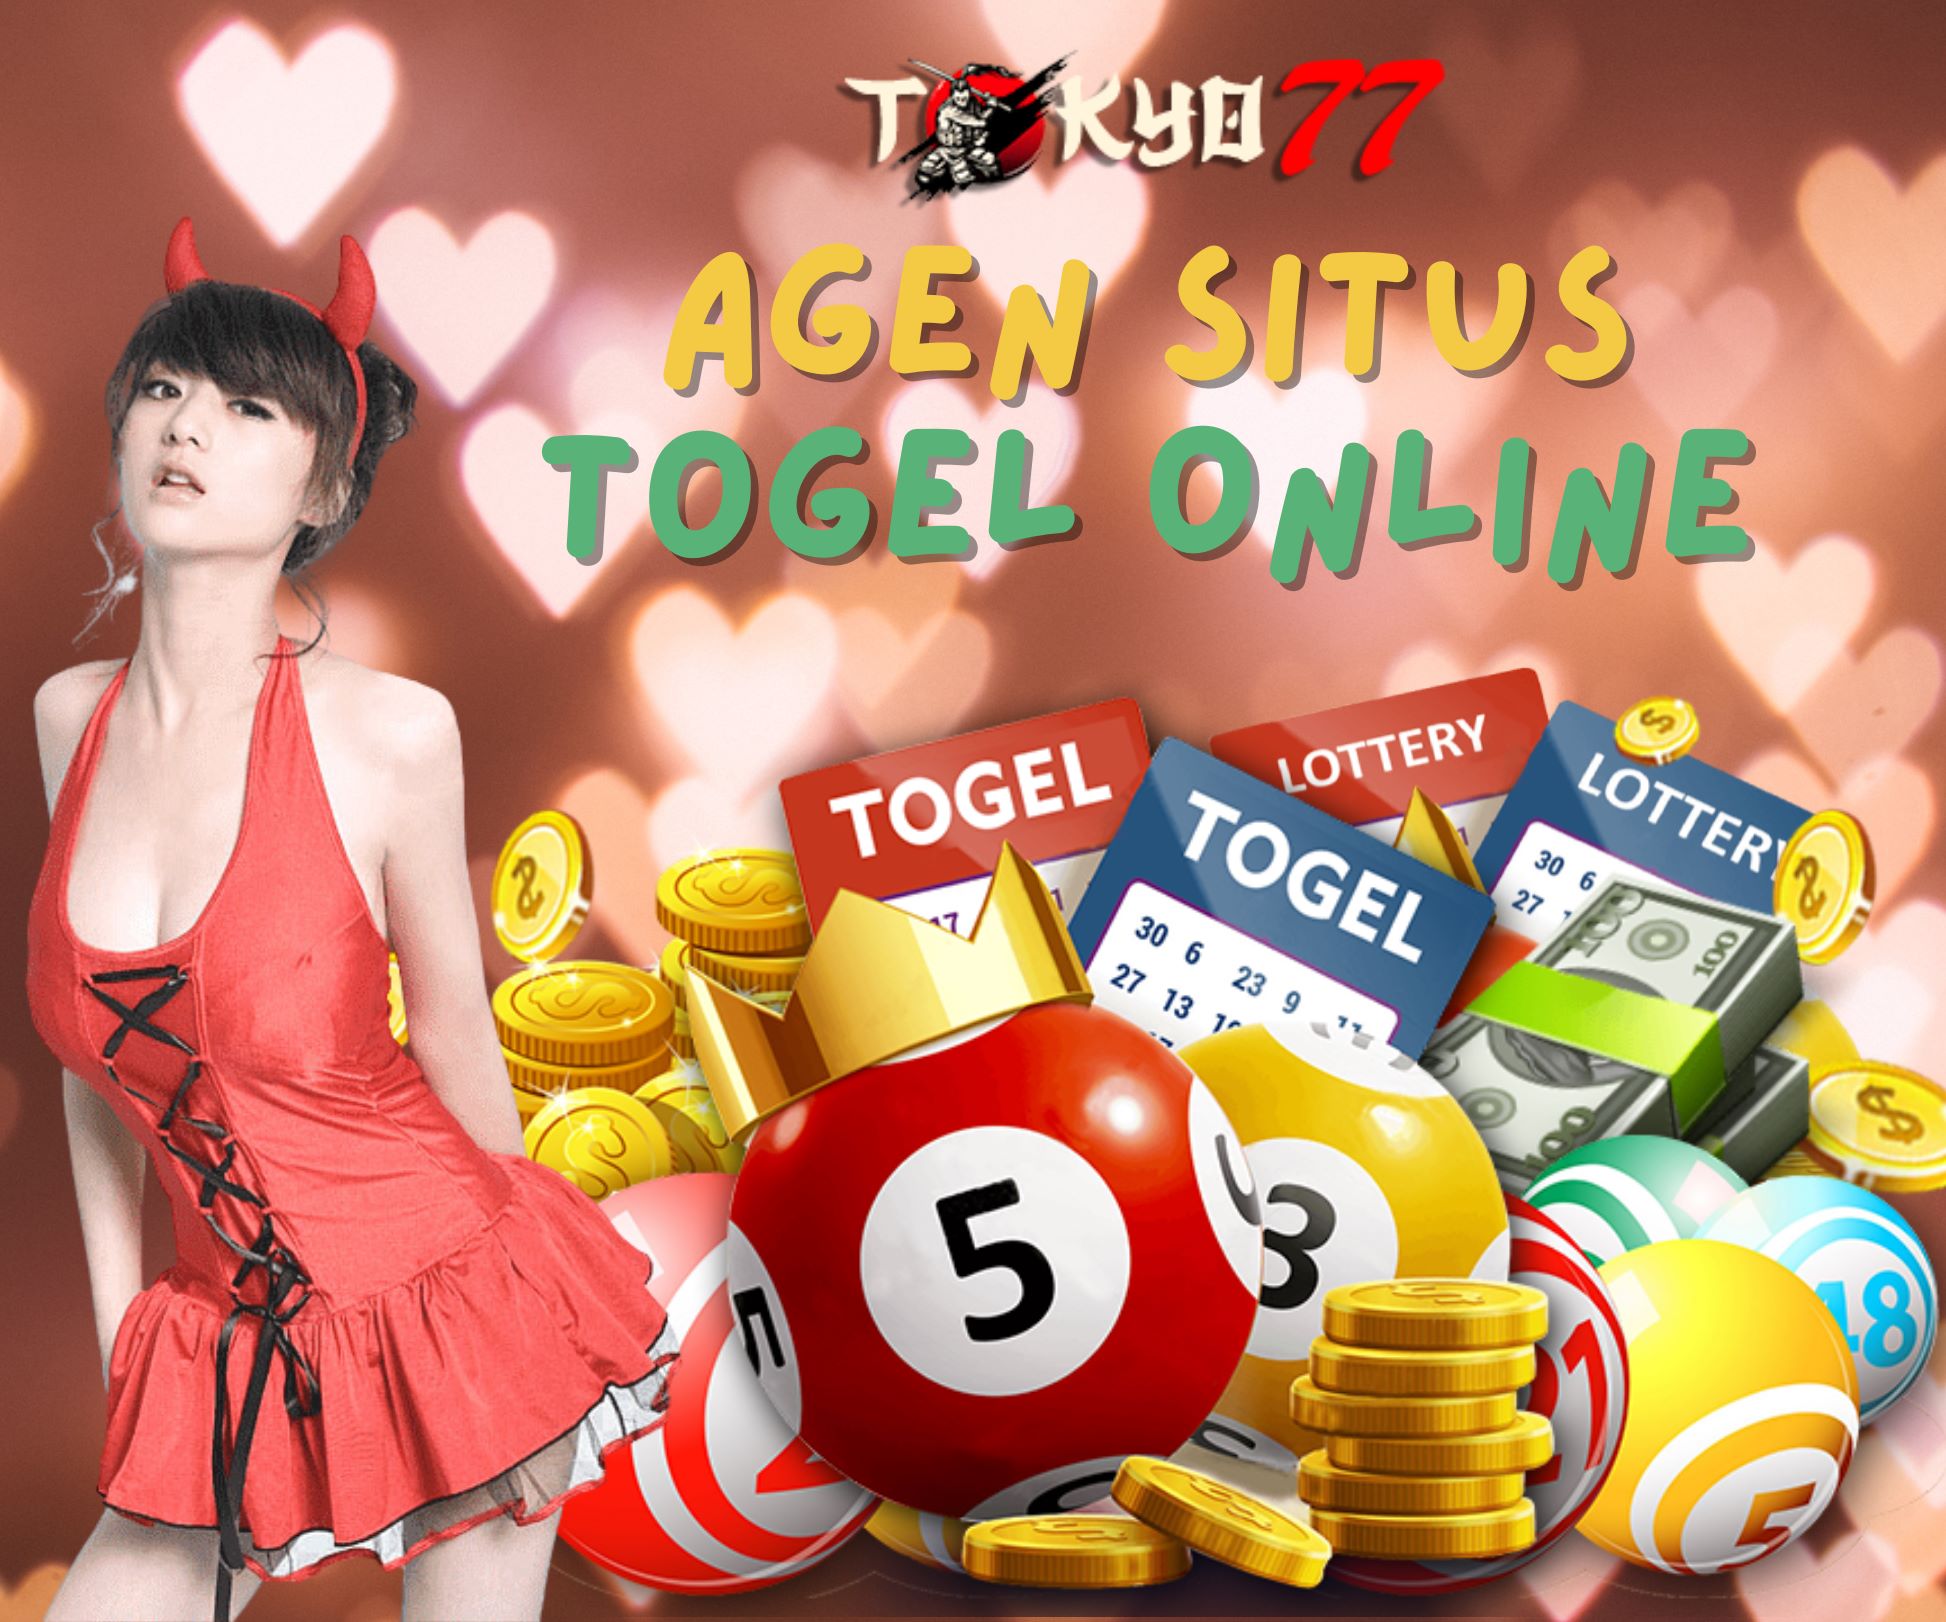 Online Togel: Feel the excitement of guessing your dreams